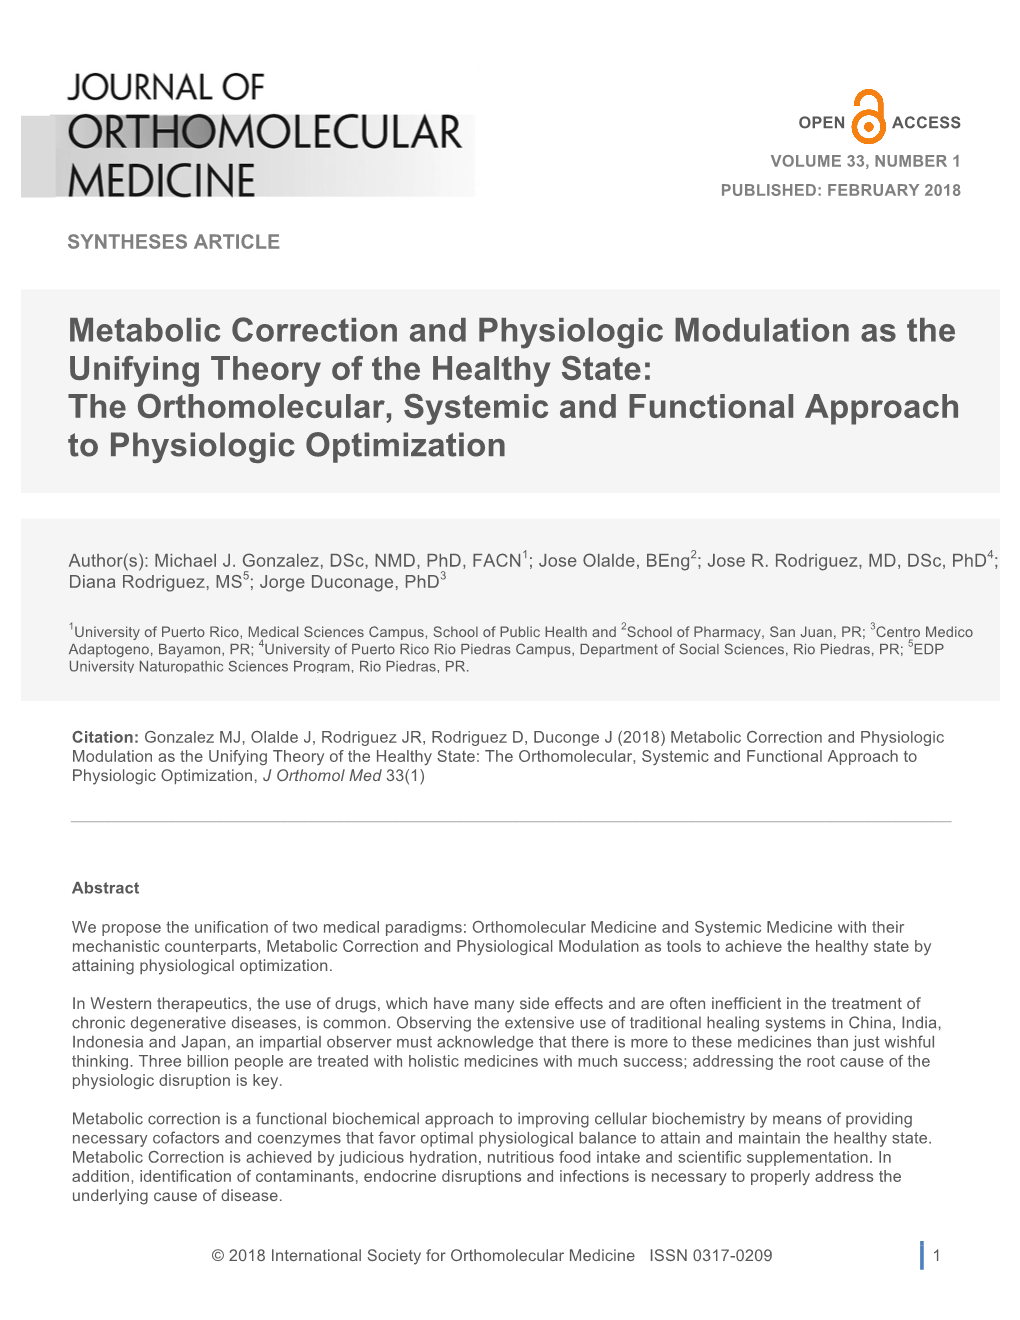 Metabolic Correction and Physiologic Modulation As the Unifying Theory